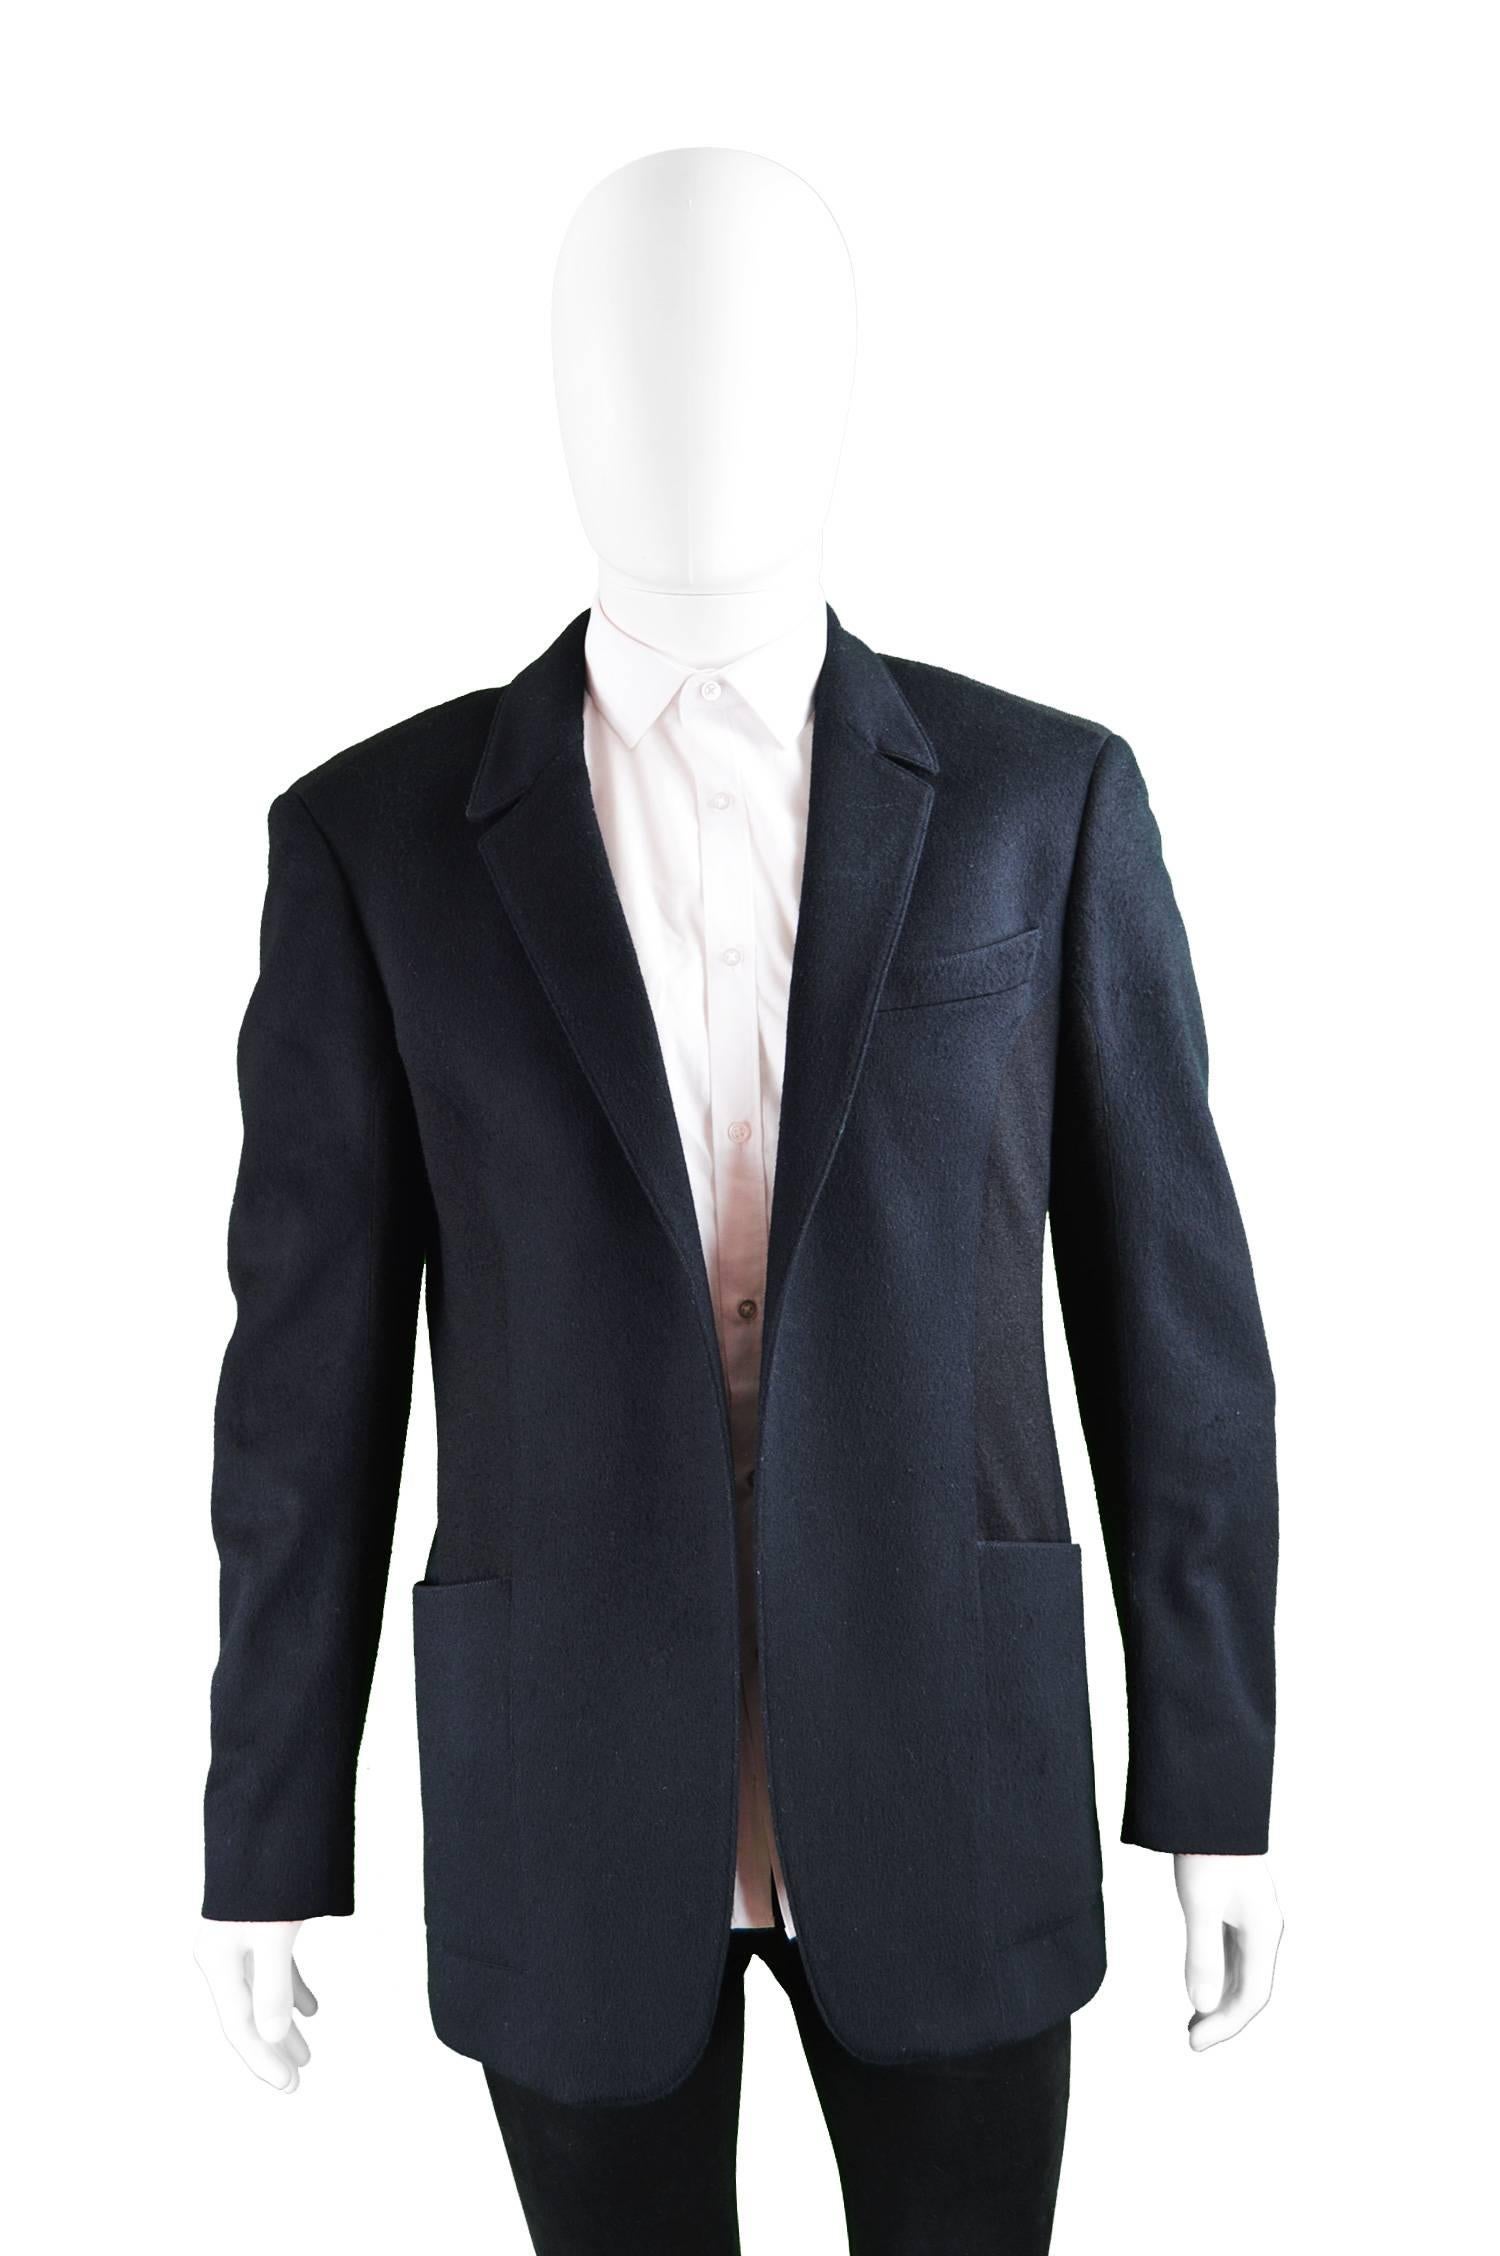 An excellent vintage mens blazer jacket by legendary French fashion designer, Thierry Mugler. Made in Italy, it is impeccably tailored with minimalist detailing, the lapels have Mugler's signature pointed collar, offering an edgy, futuristic touch.